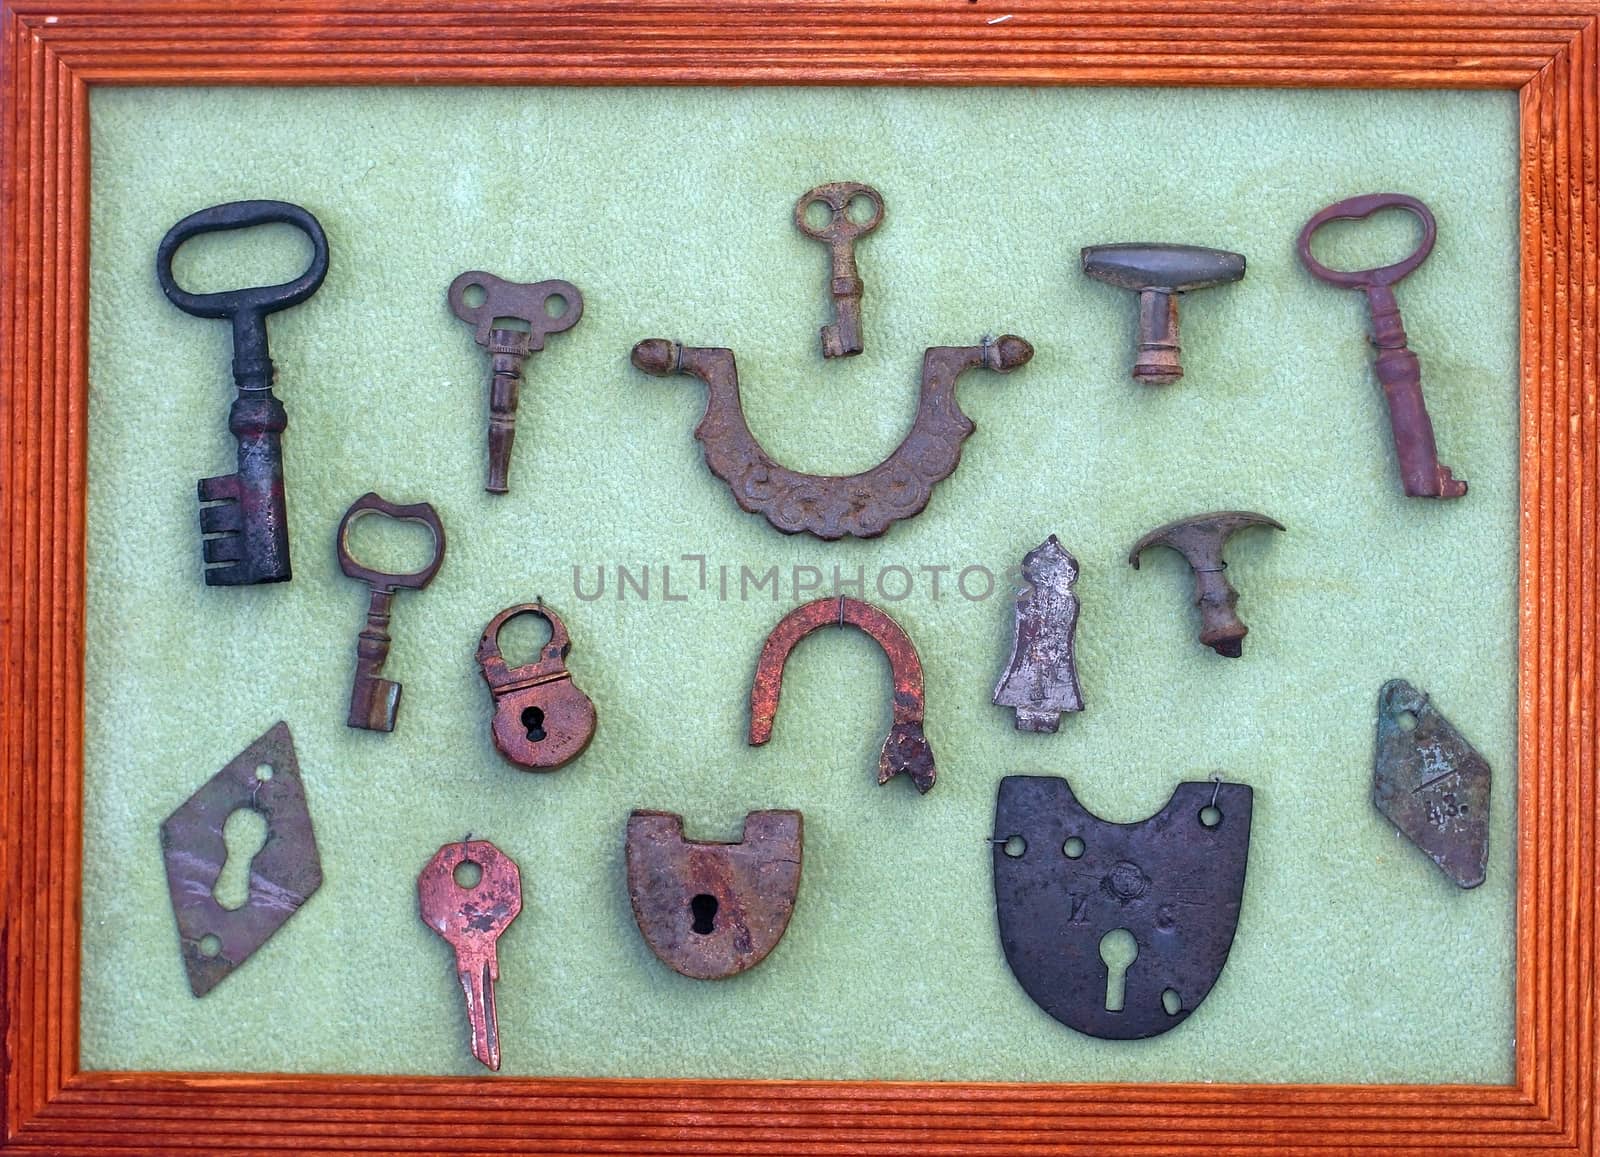 A collection of very old keys and locks in a wooden frame